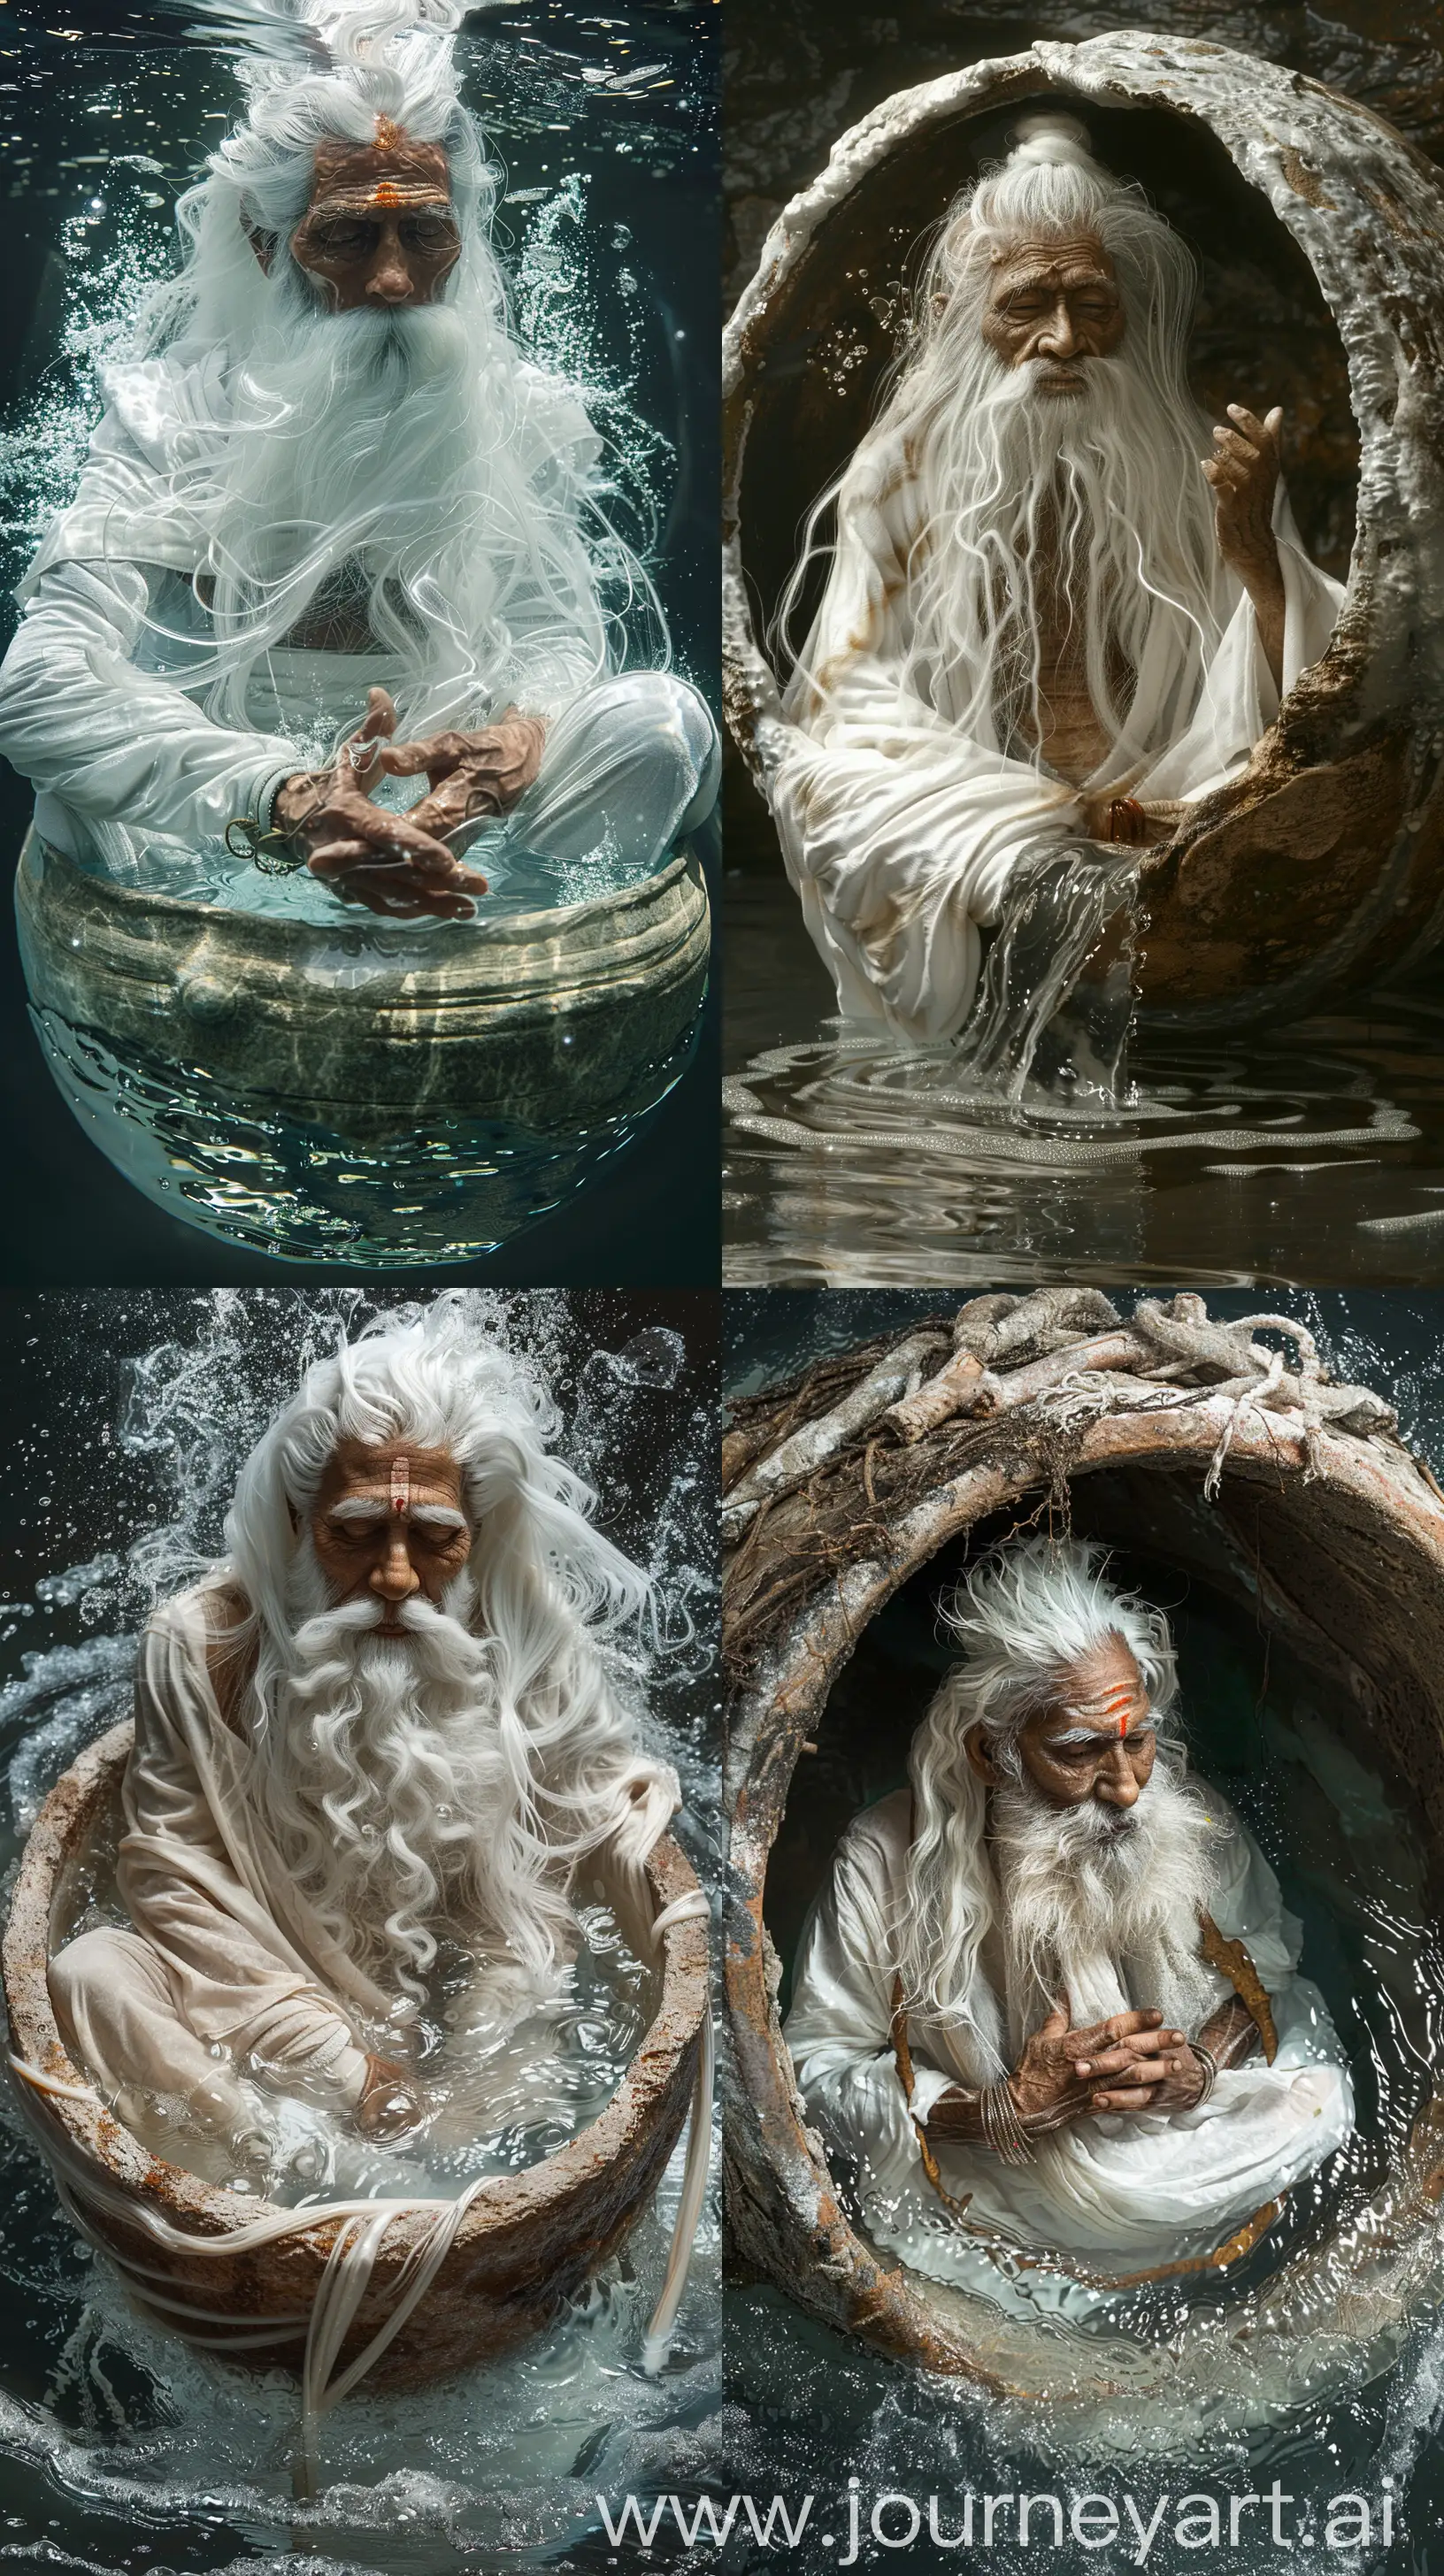 Realistic image depicting a shrunken elderly Indian sage with white long hair and beard in white attire inside a small water vessel, submerged in the water inside the vessel, intricate details, high resolution image, zoomed out image --s 200 --ar 9:16 --v 6